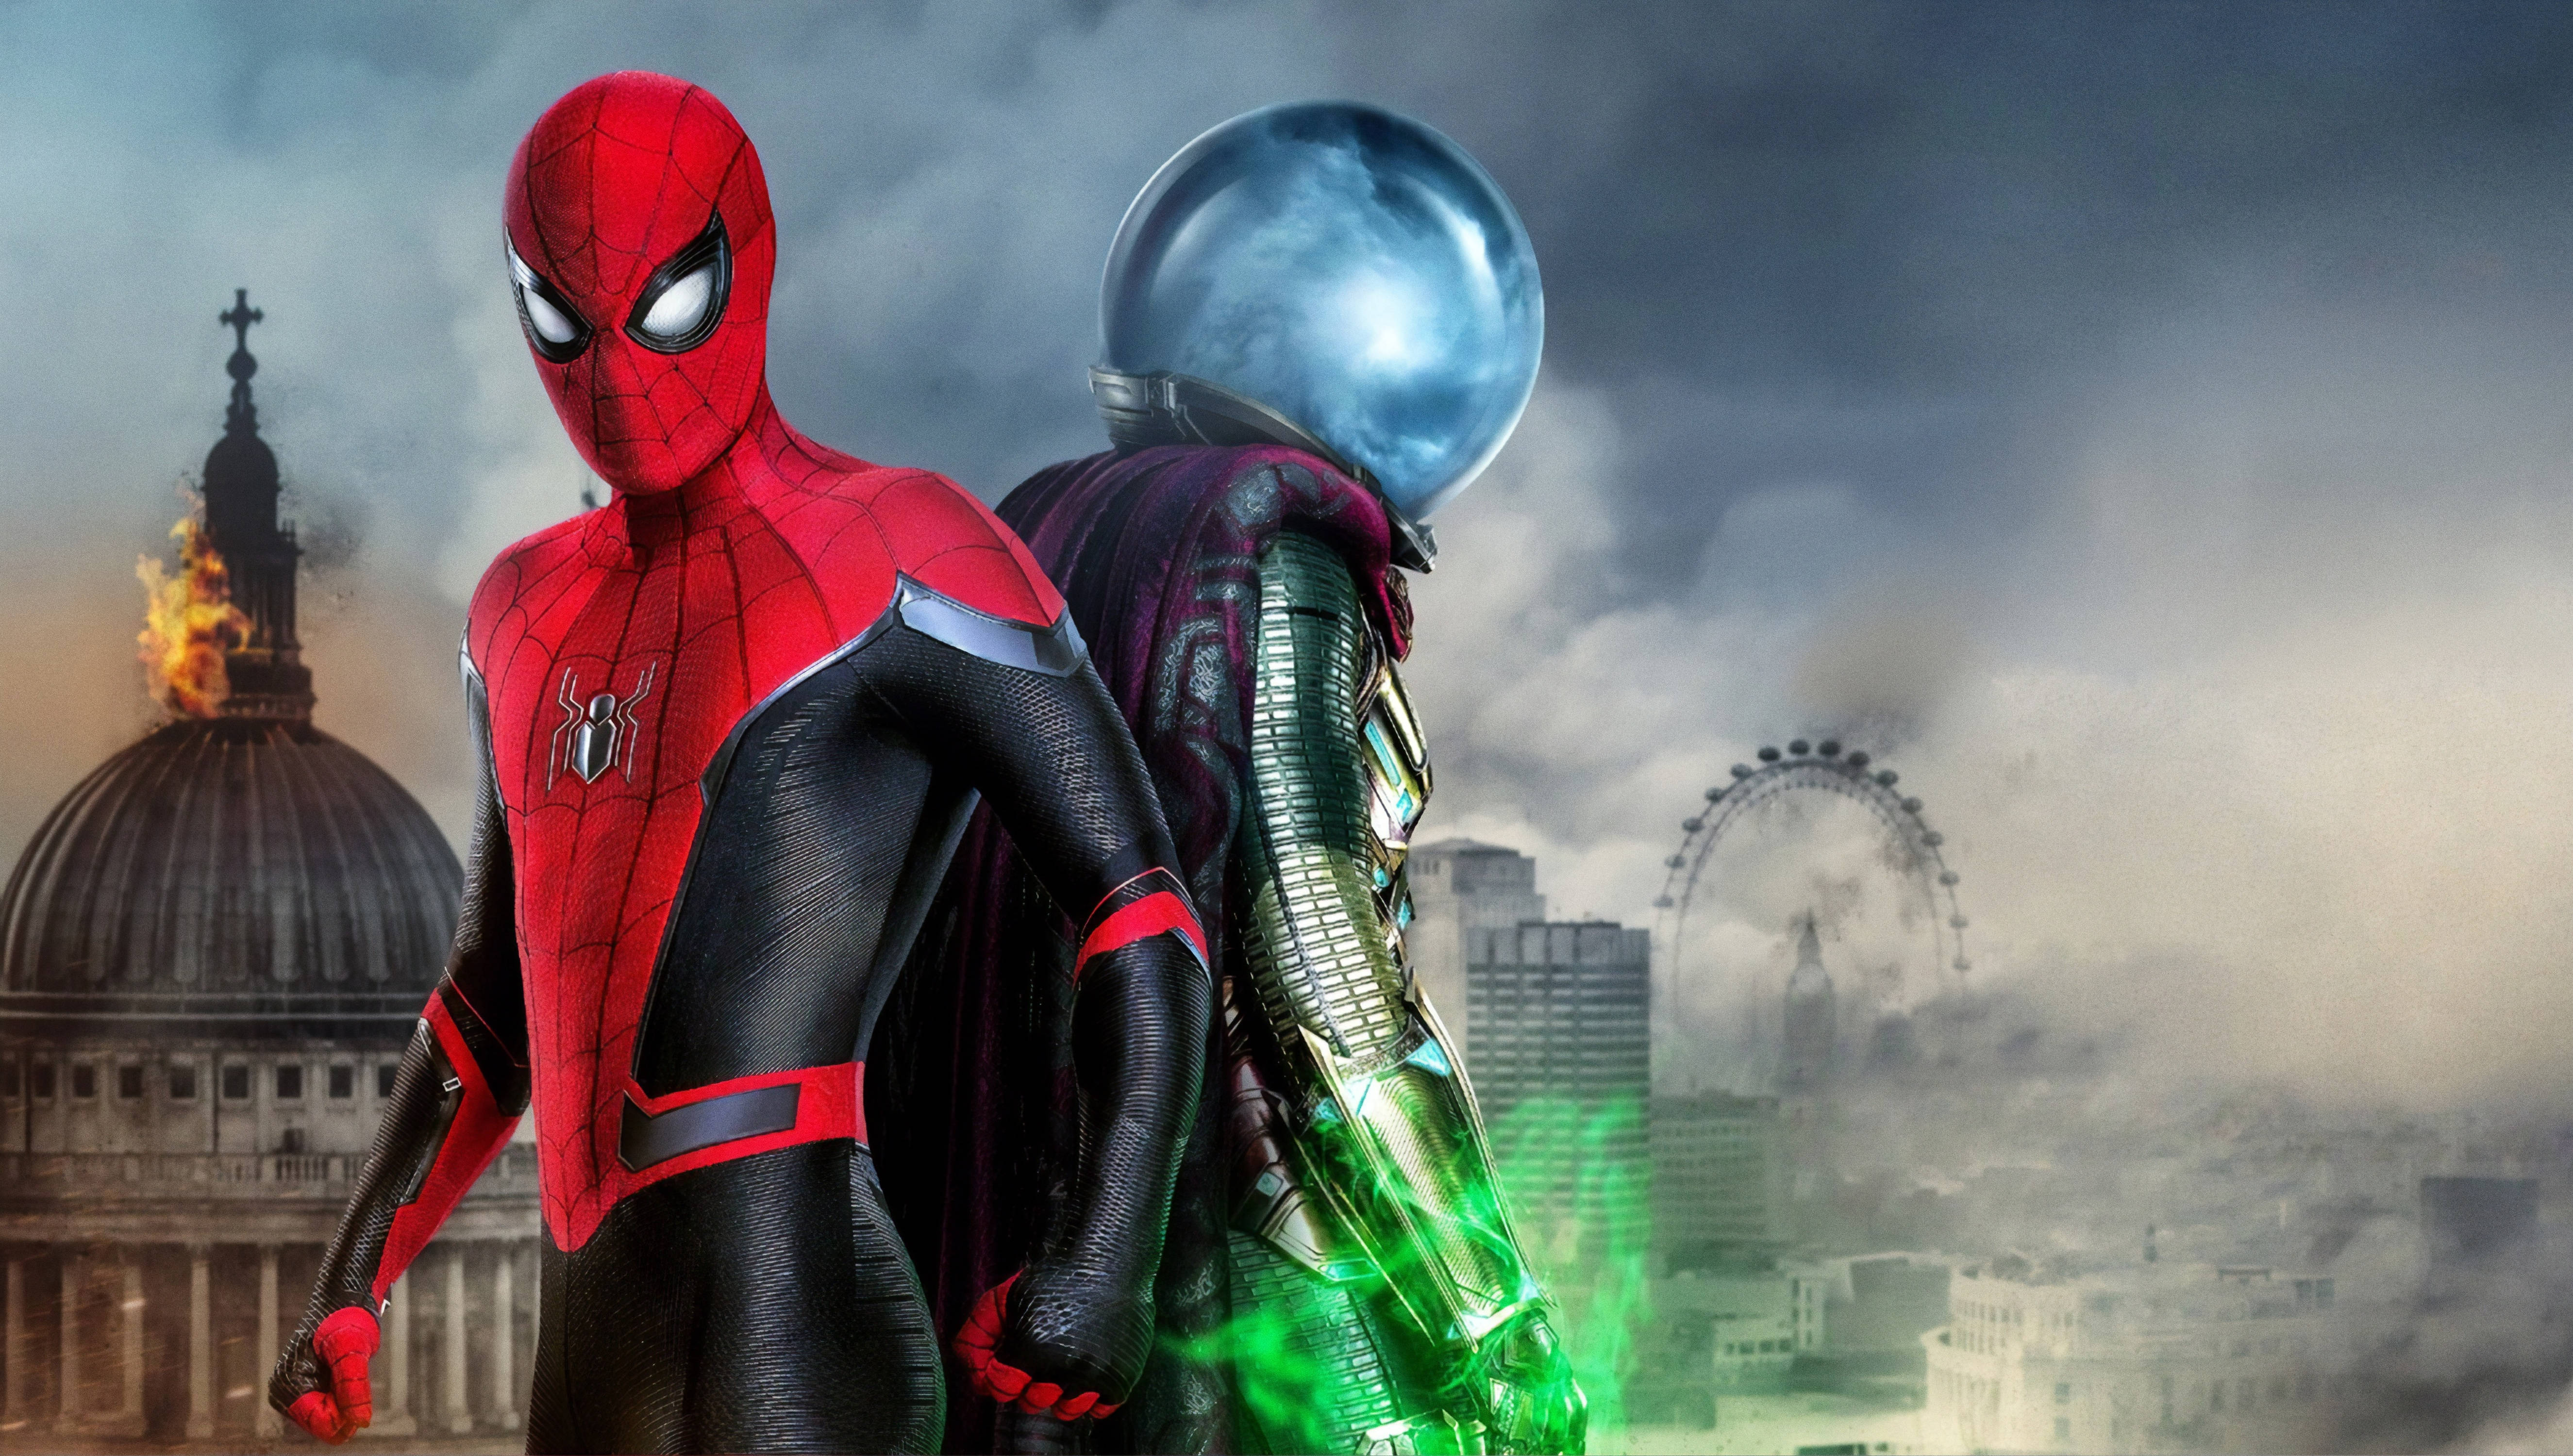 Download Mysterio And Spider-man Poster Wallpaper 